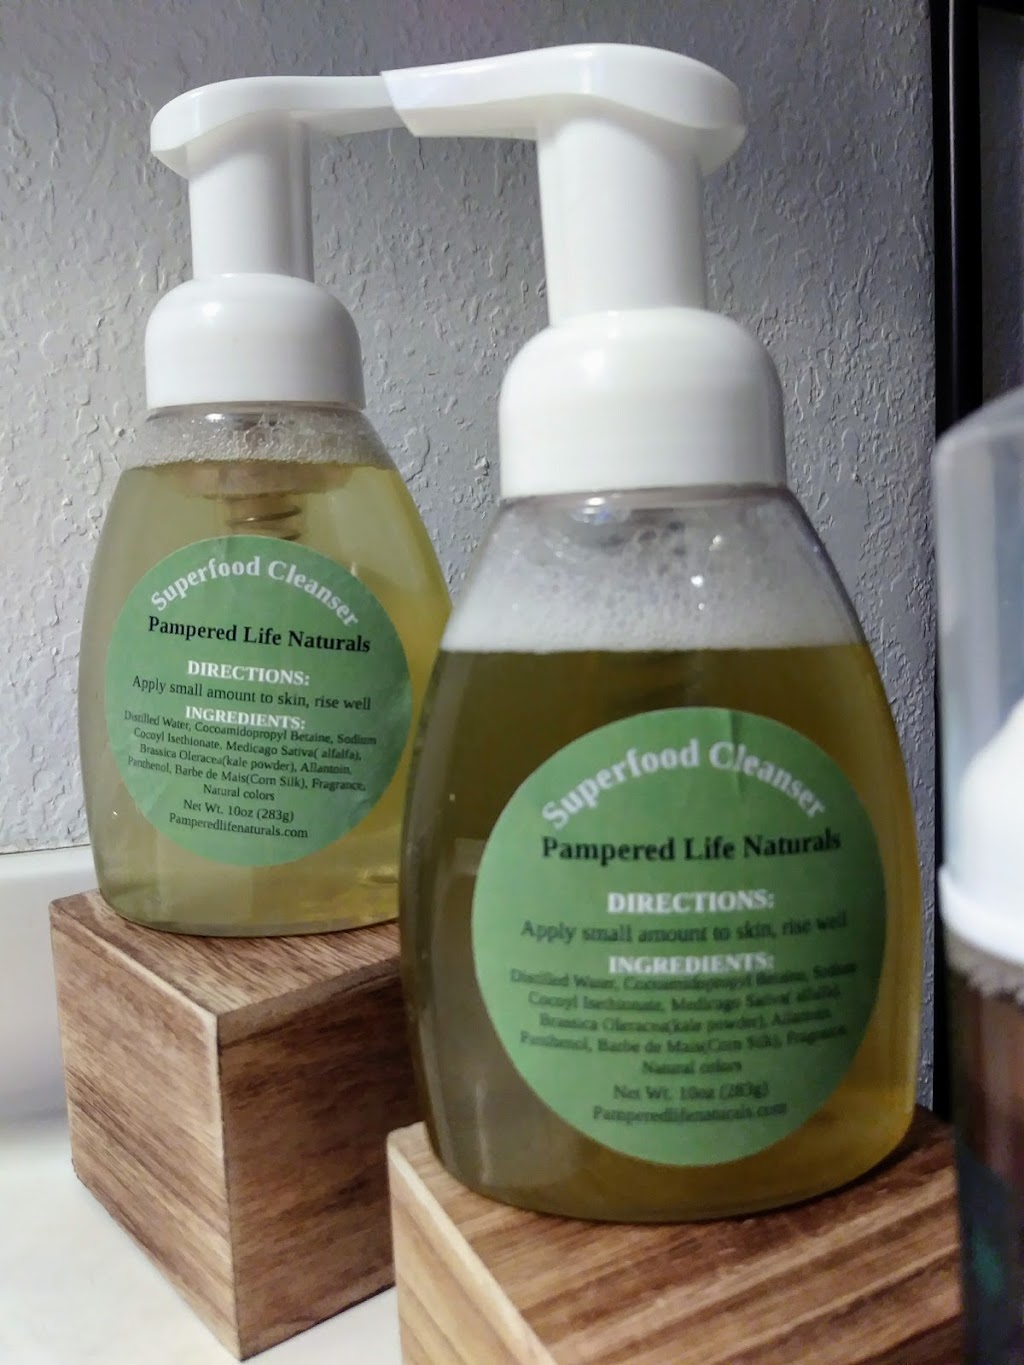 Pampered Life Naturals | 723 W 82nd St, Los Angeles, CA 90044 | Phone: (424) 465-1625